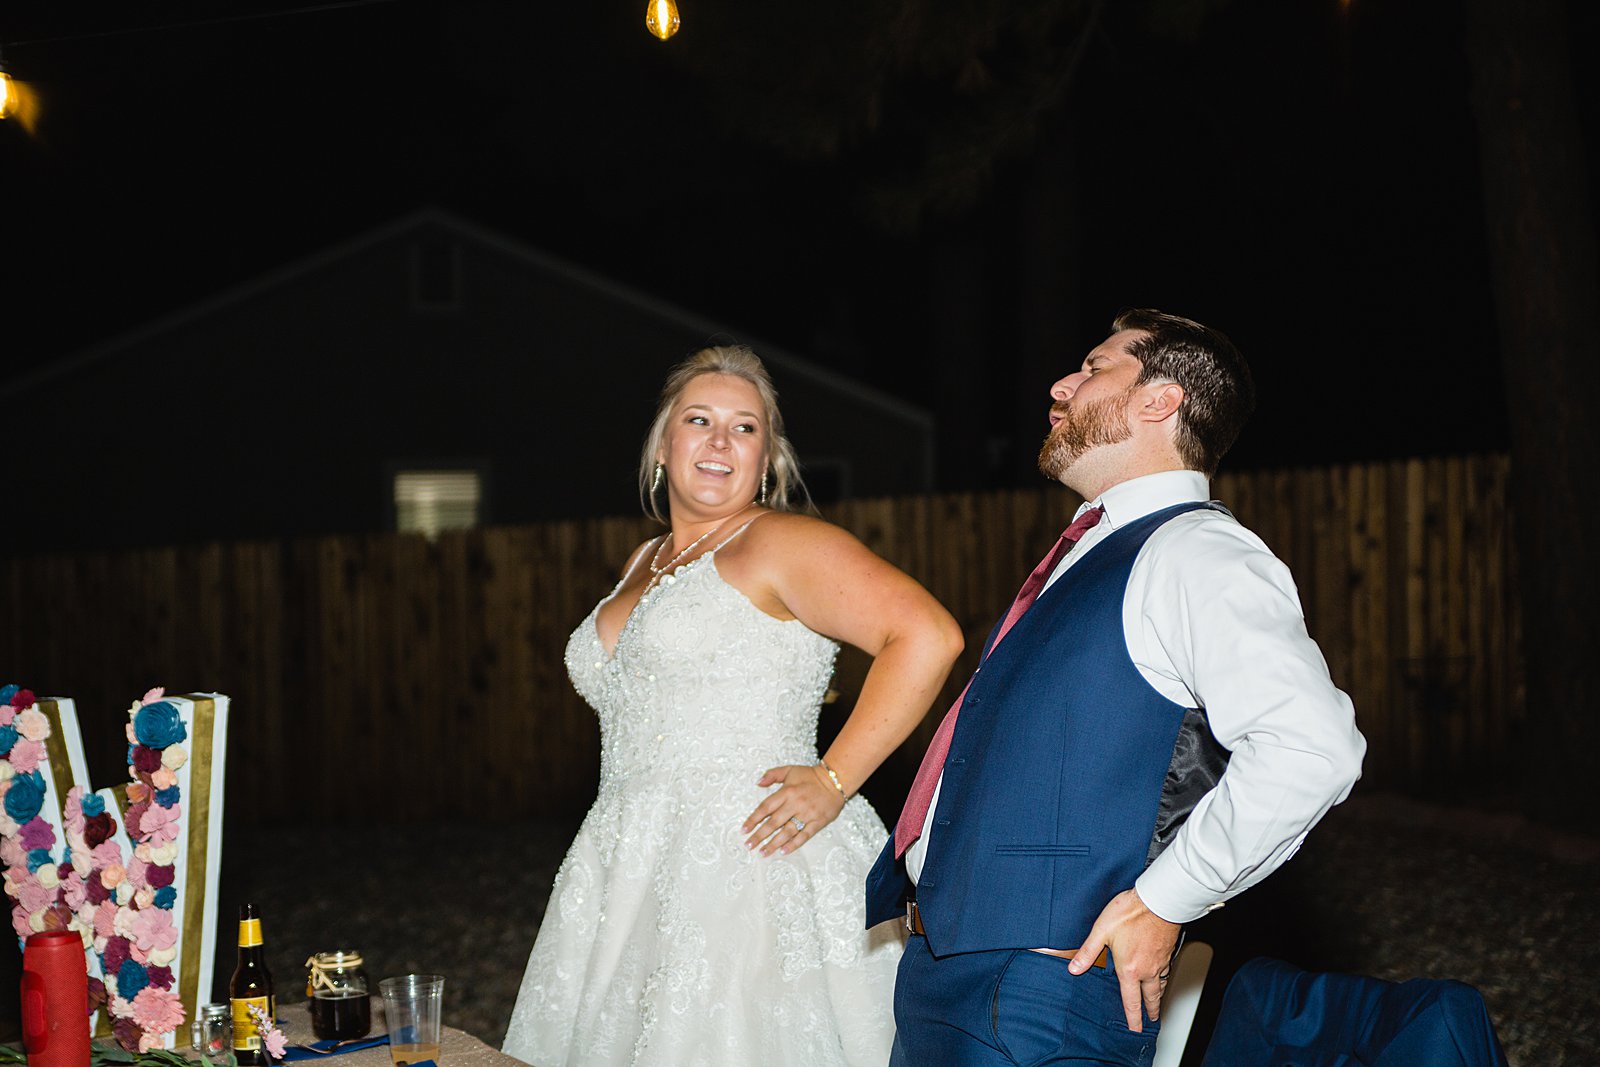 Bride and groom dancing the macarena at their wedding reception by PMA Photography.